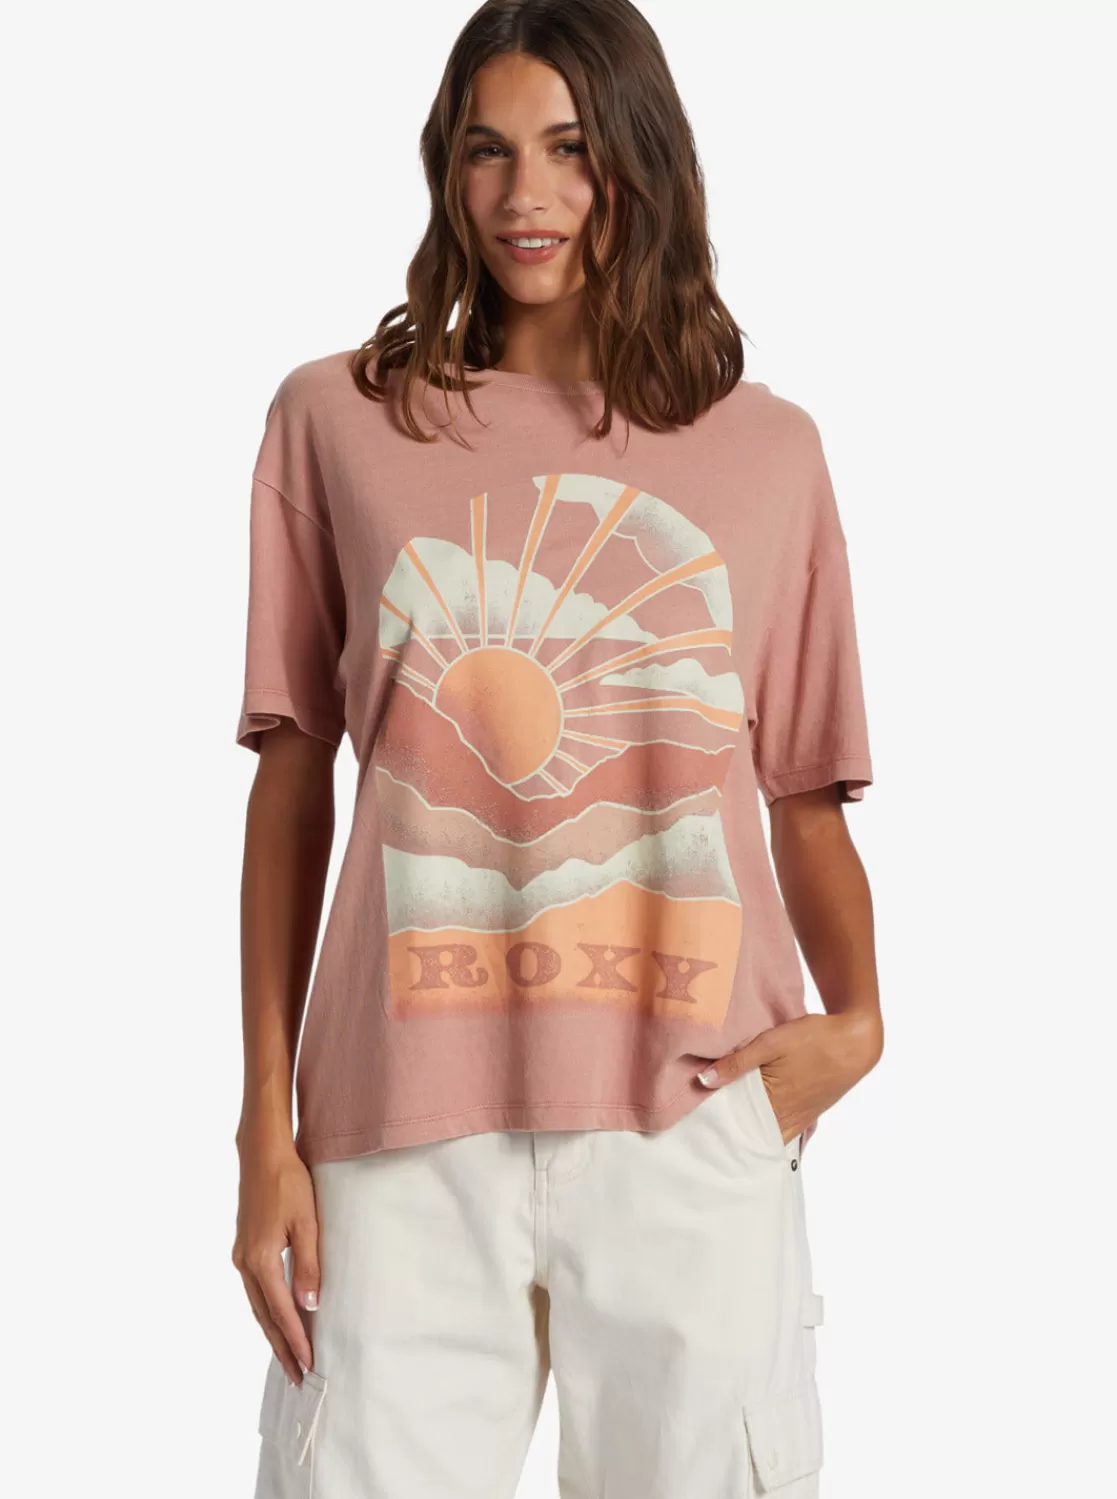 Get Lost In The Moment Oversized Boyfriend T-Shirt-ROXY Store